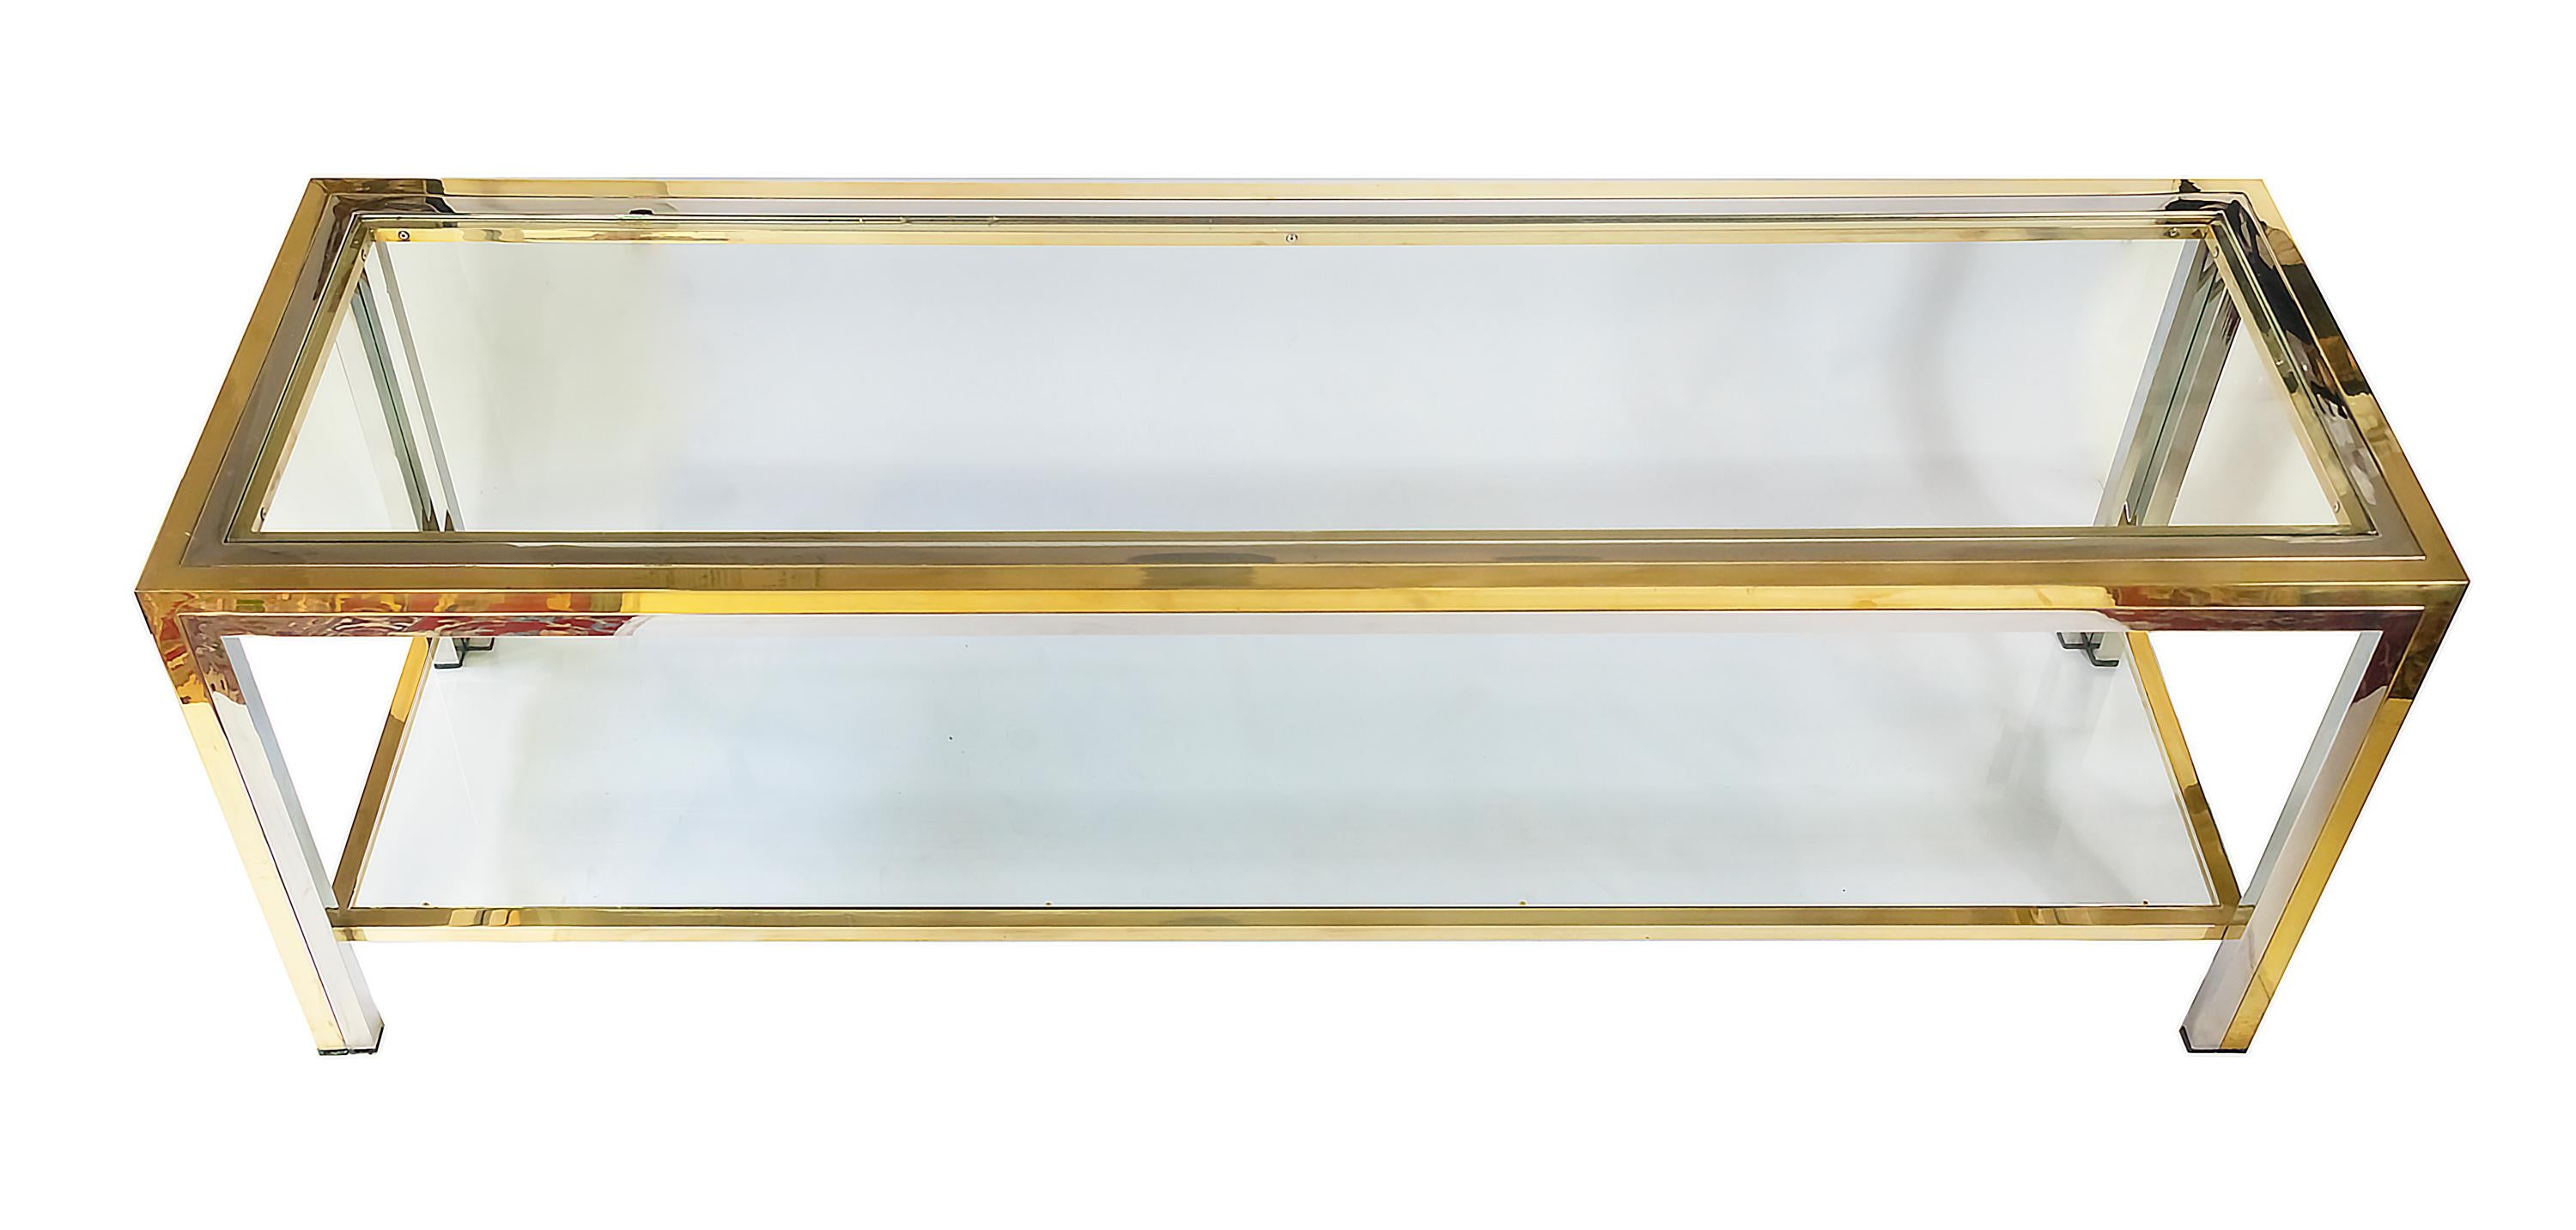 Low Italian midcentury brass, chrome and glass console table by Romeo Rega from 1970s.
The top and down shelve of this console are with clear glass.
 